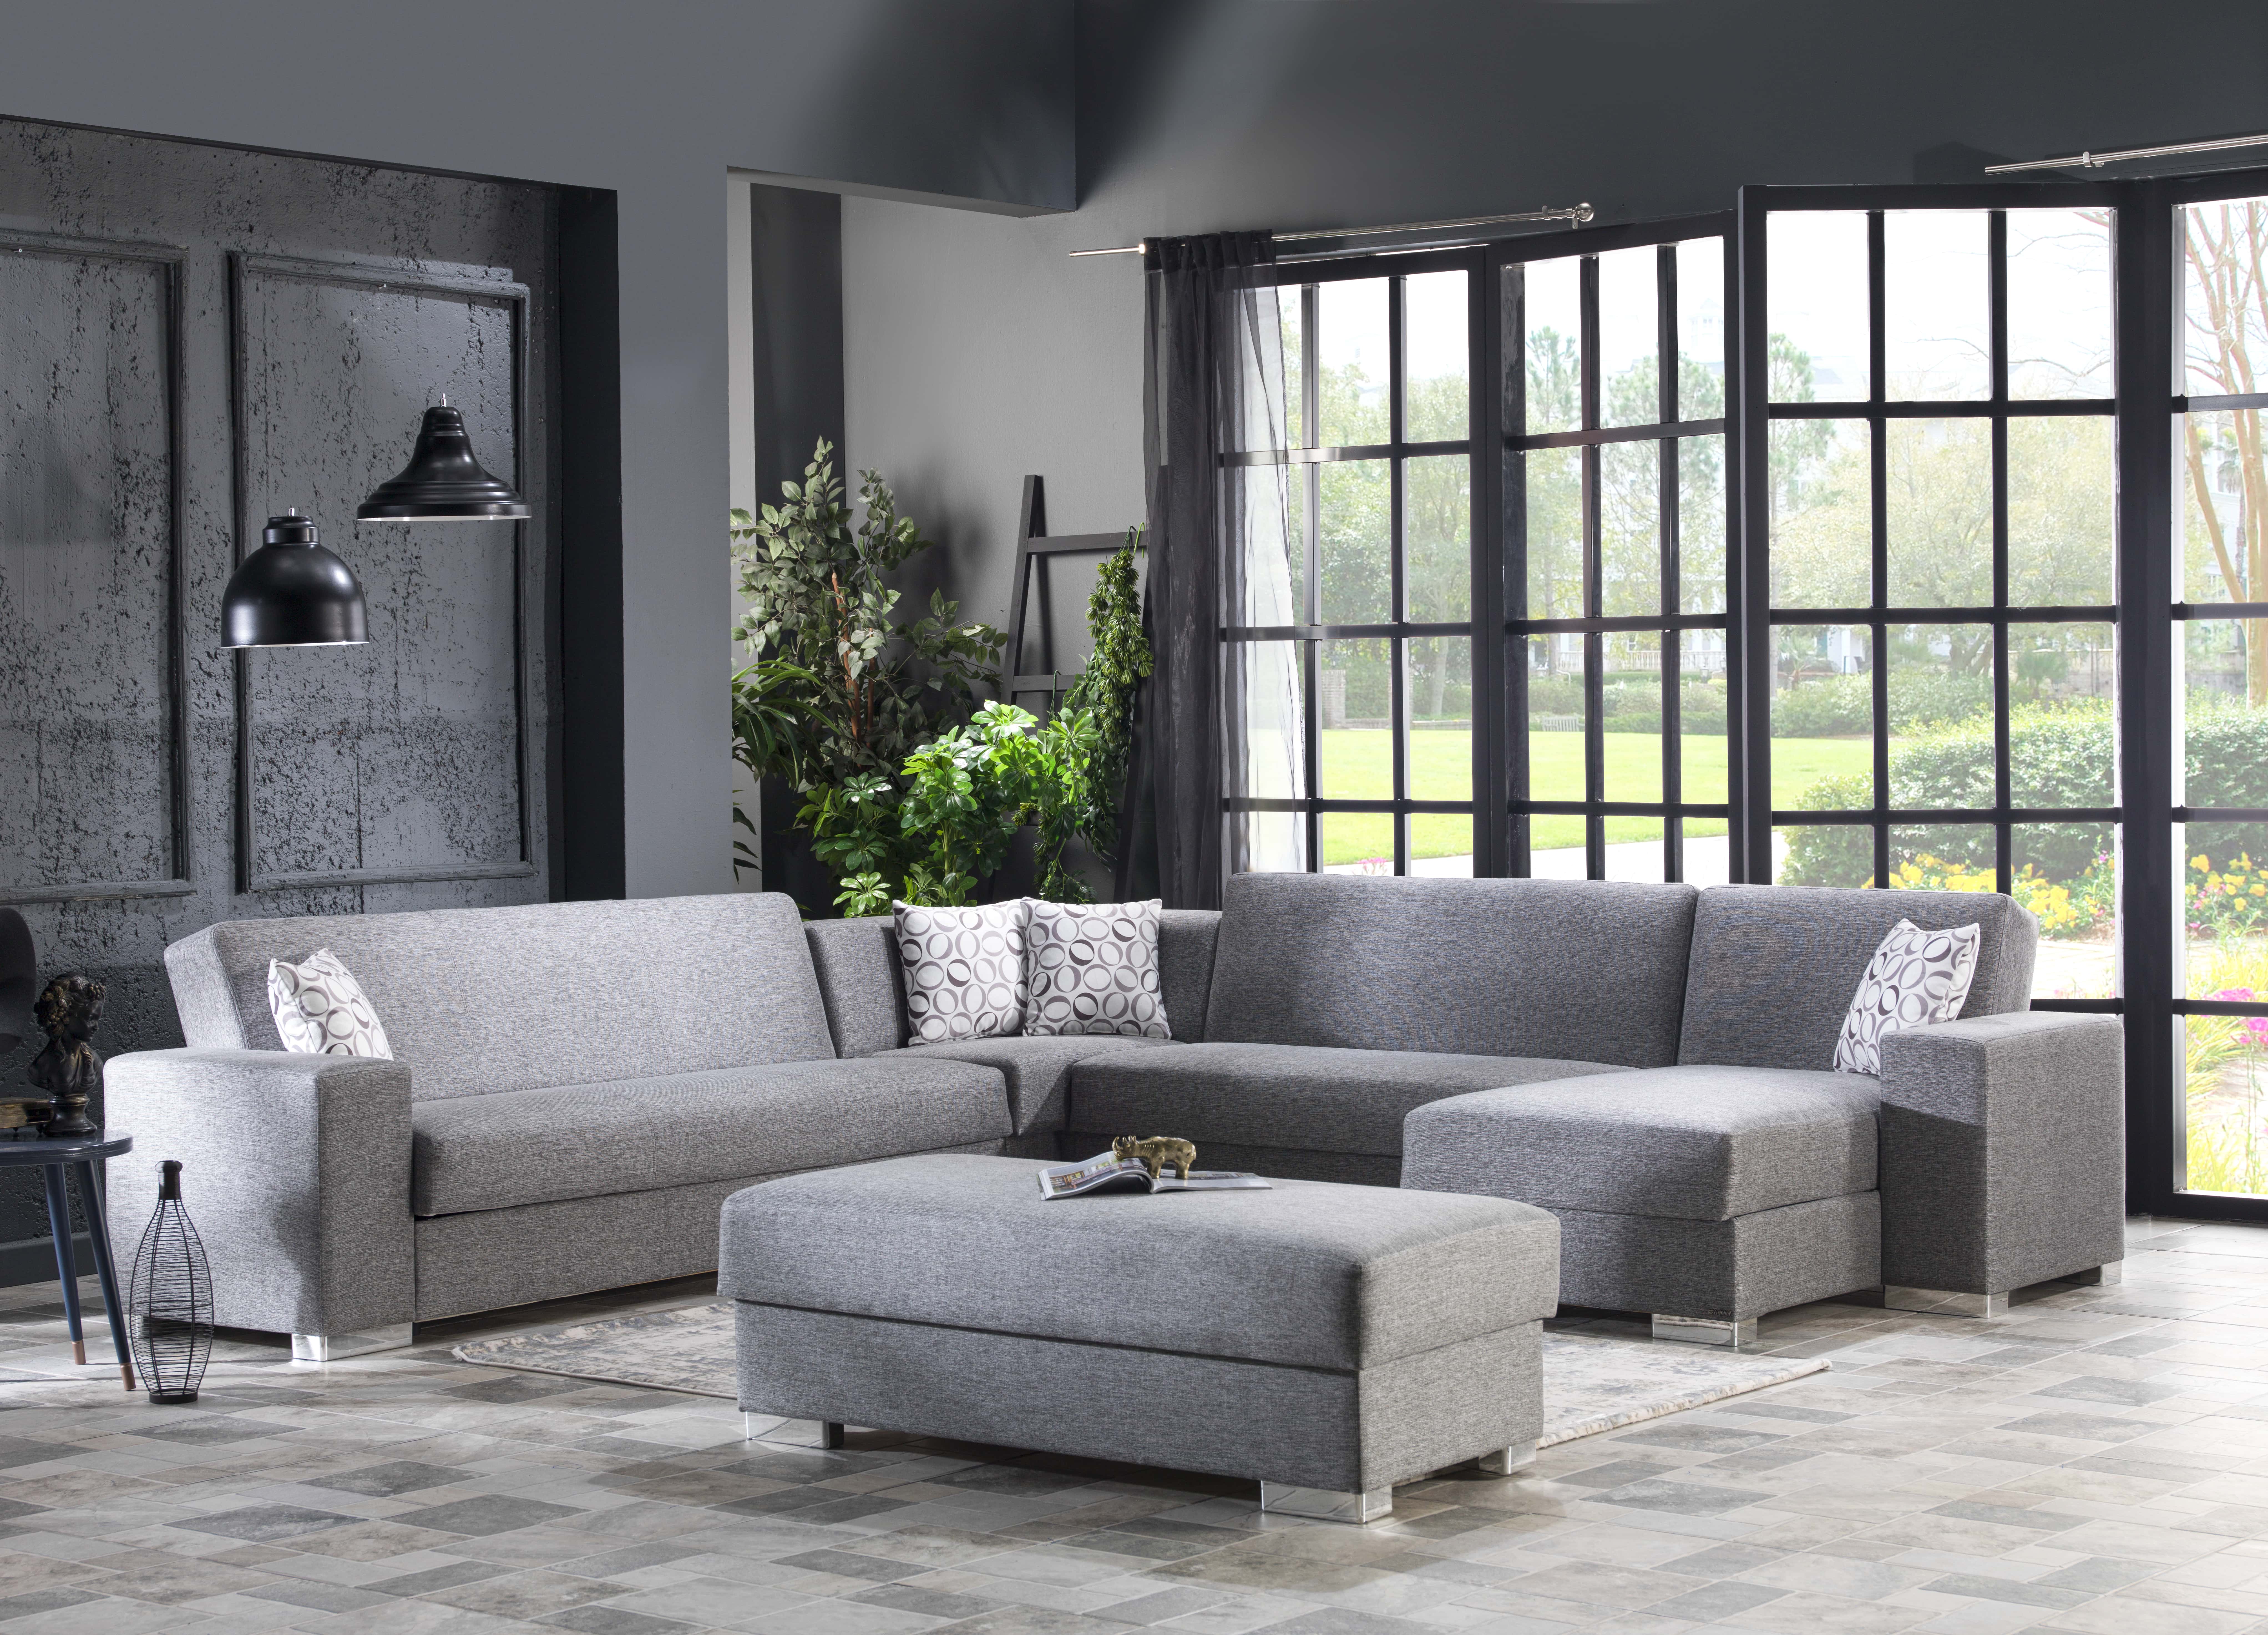 Kobe Diego Gray Sectional Sofa Sleeper (Configuration A) by Istikbal  Furniture